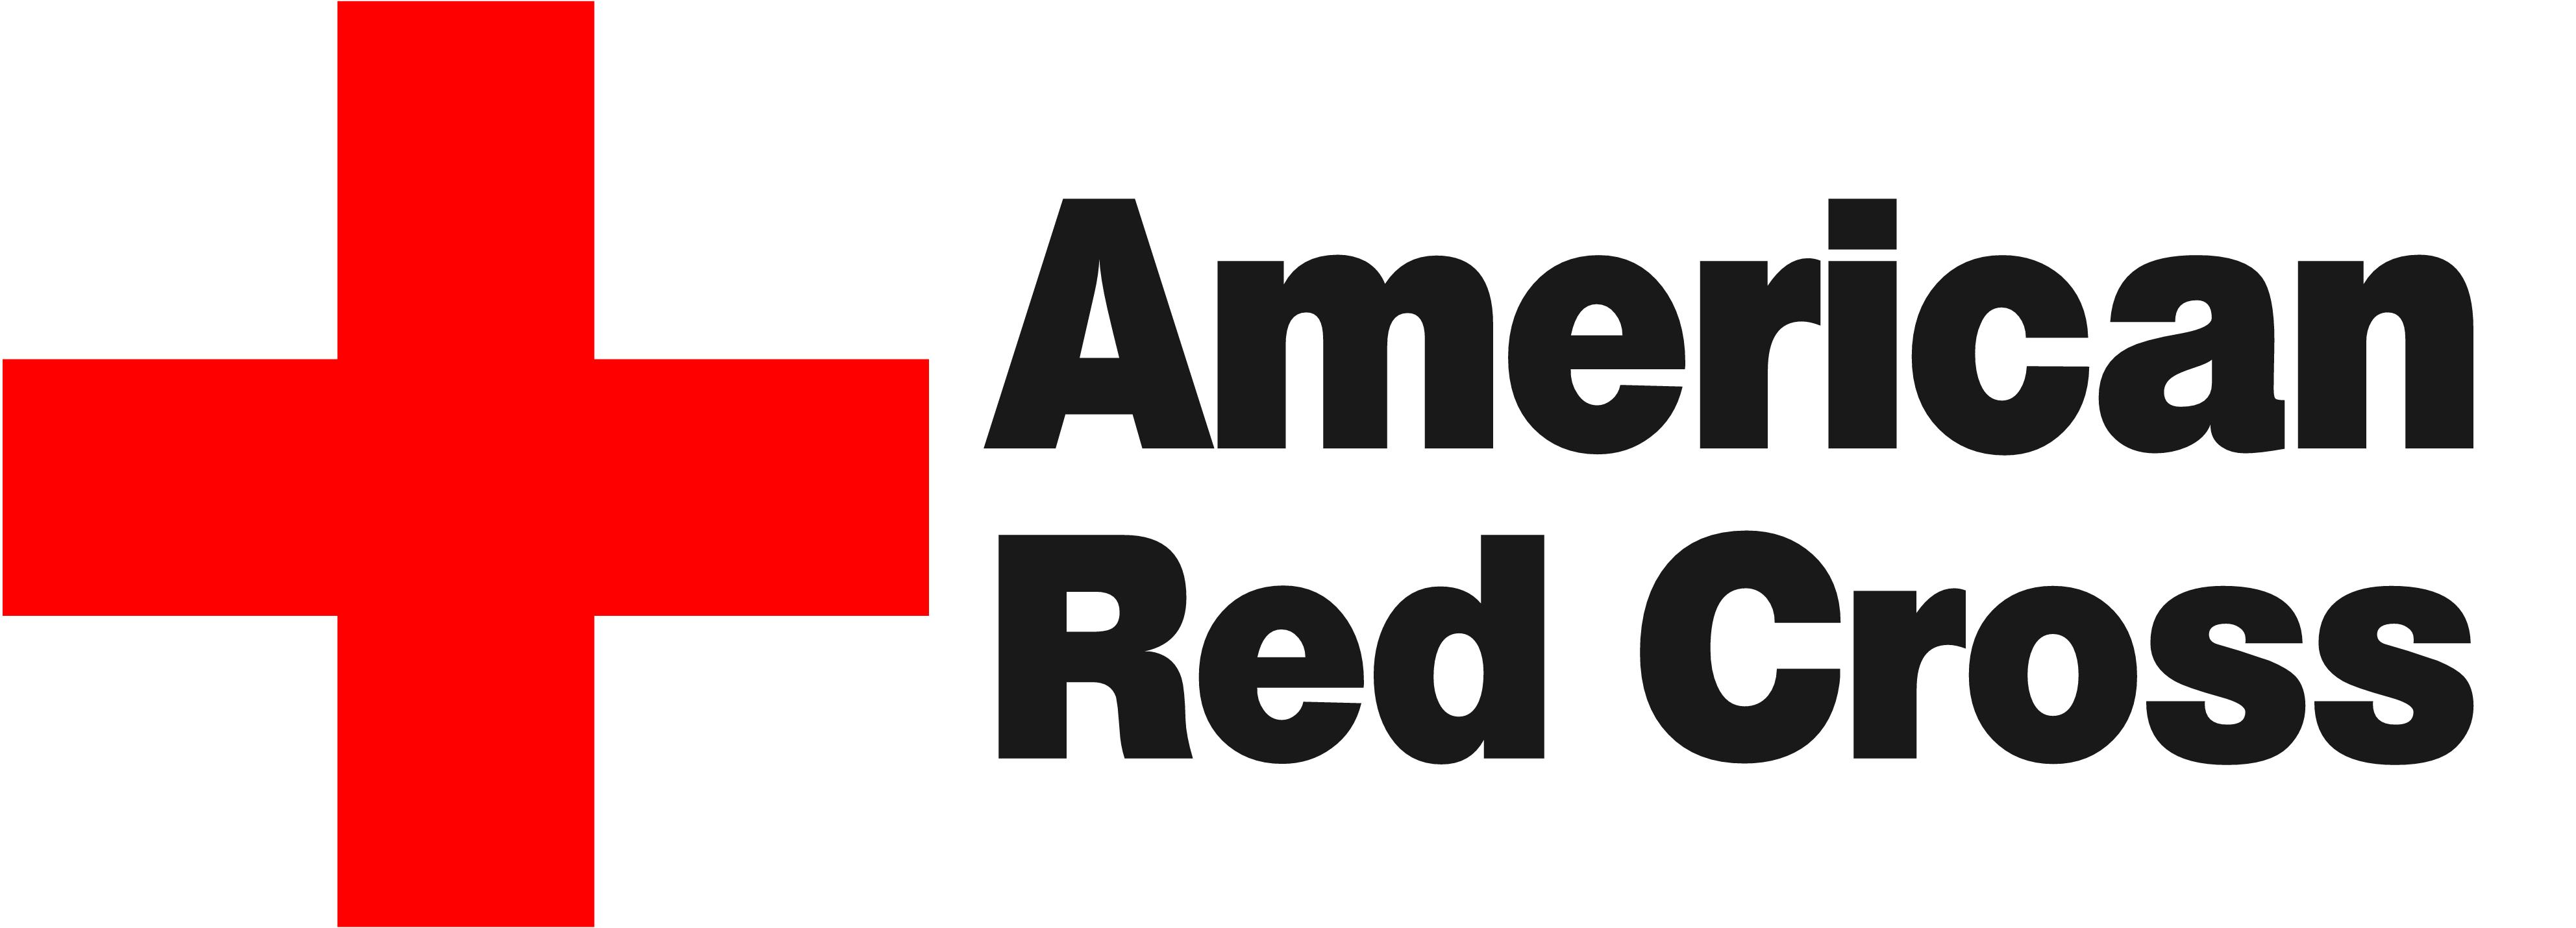 Big Picture of American Red Cross Logo - Red Cross Apologizes For “Racist” Swimming Poster *PIC* | Lady in ...